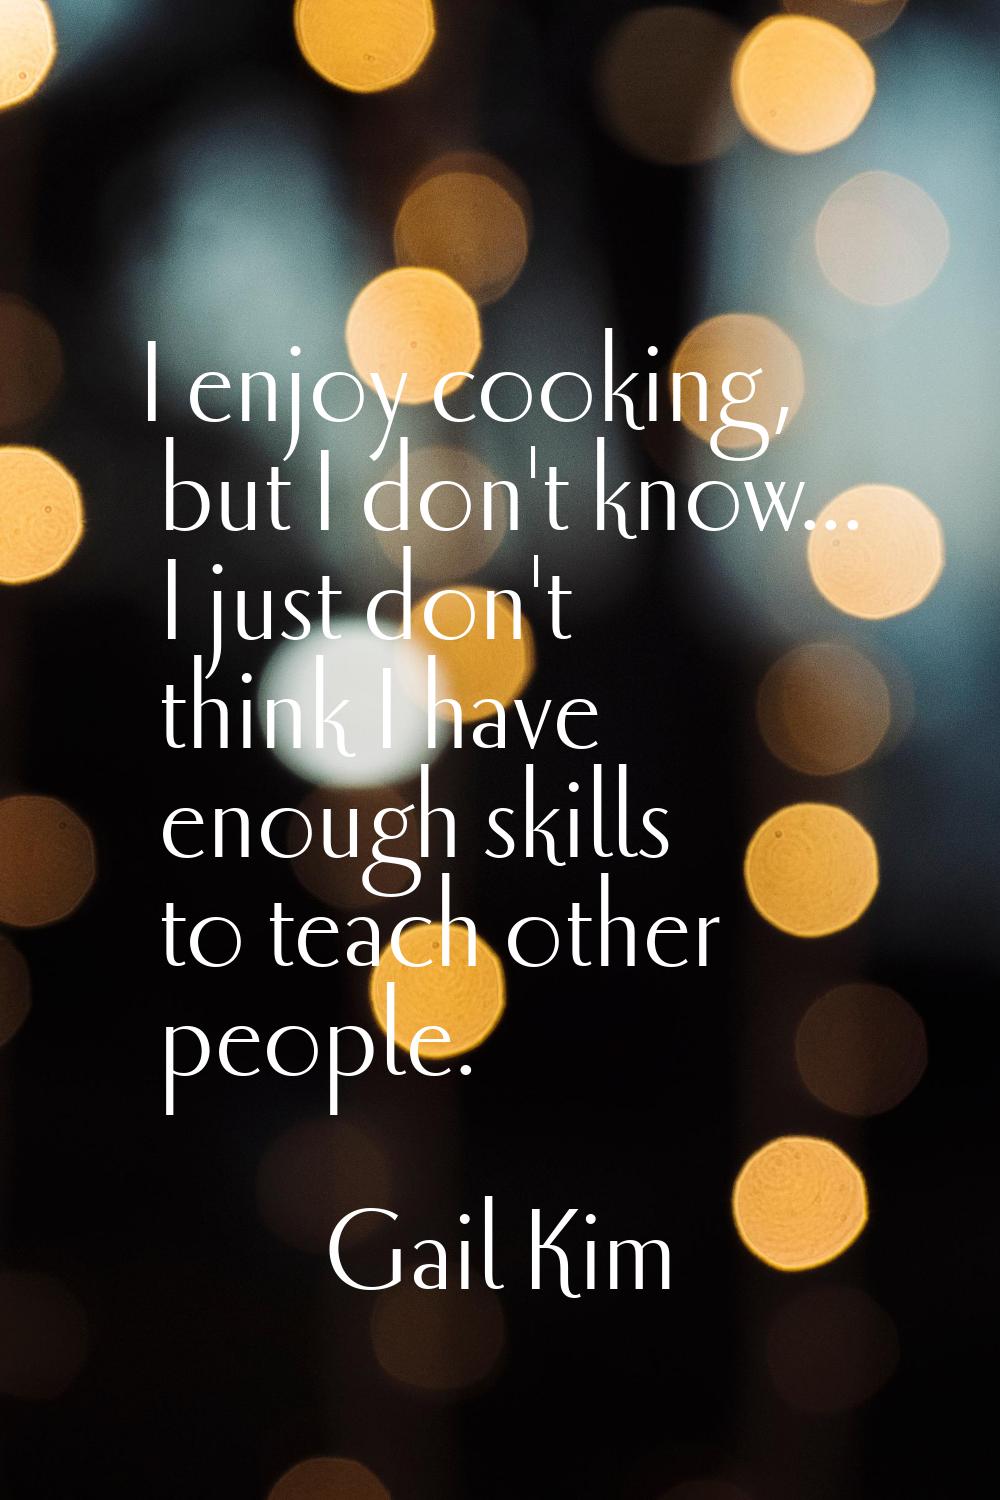 I enjoy cooking, but I don't know... I just don't think I have enough skills to teach other people.